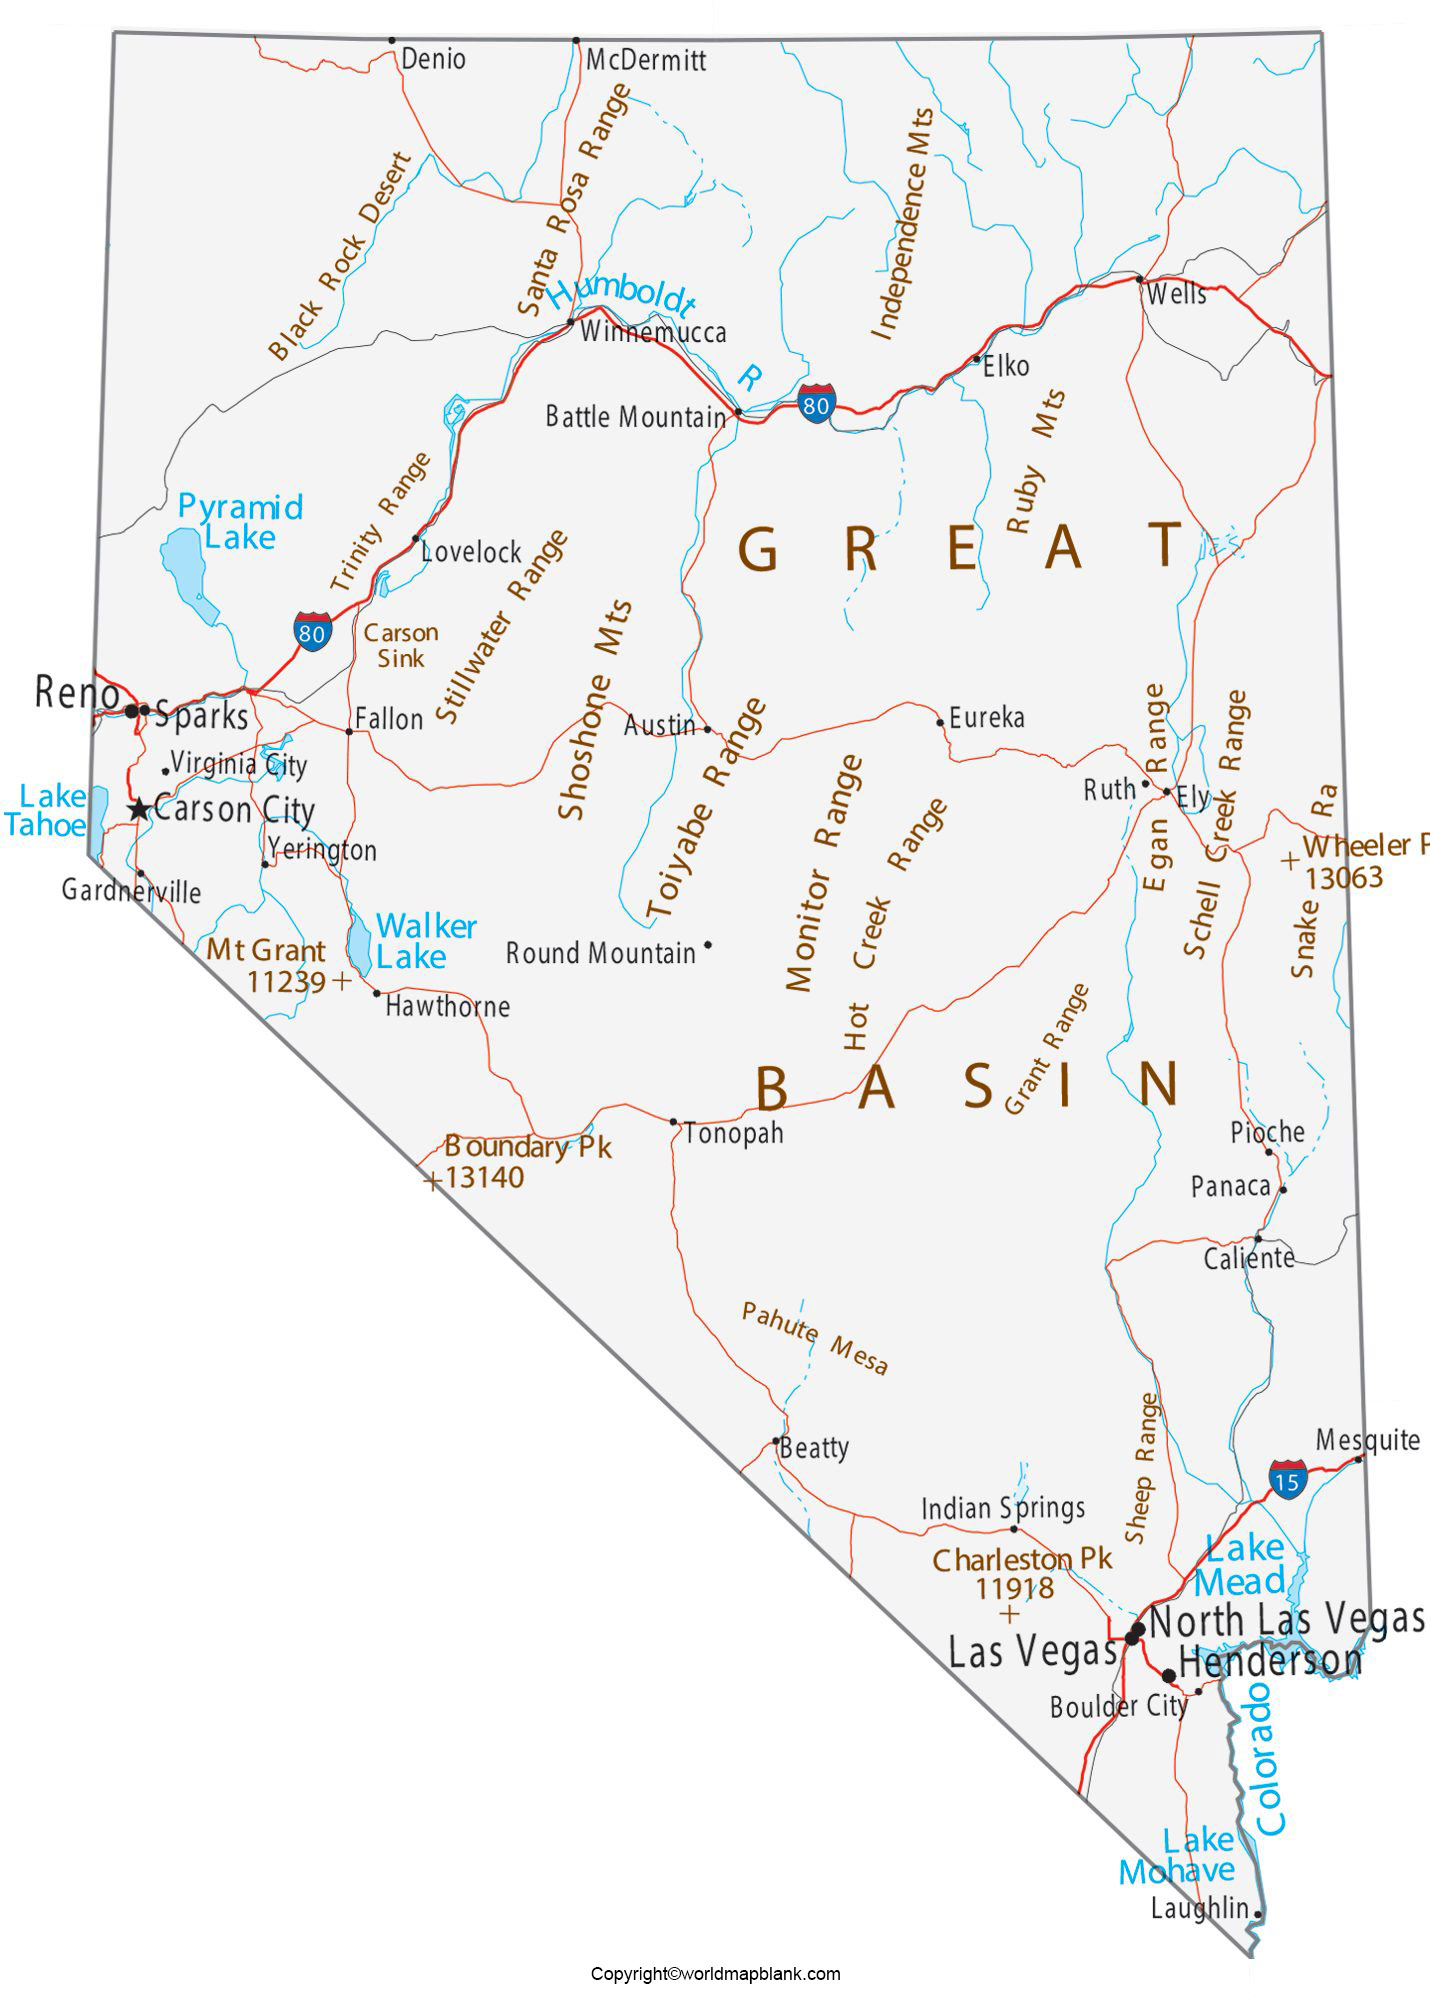 Labeled Map of Nevada with Cities